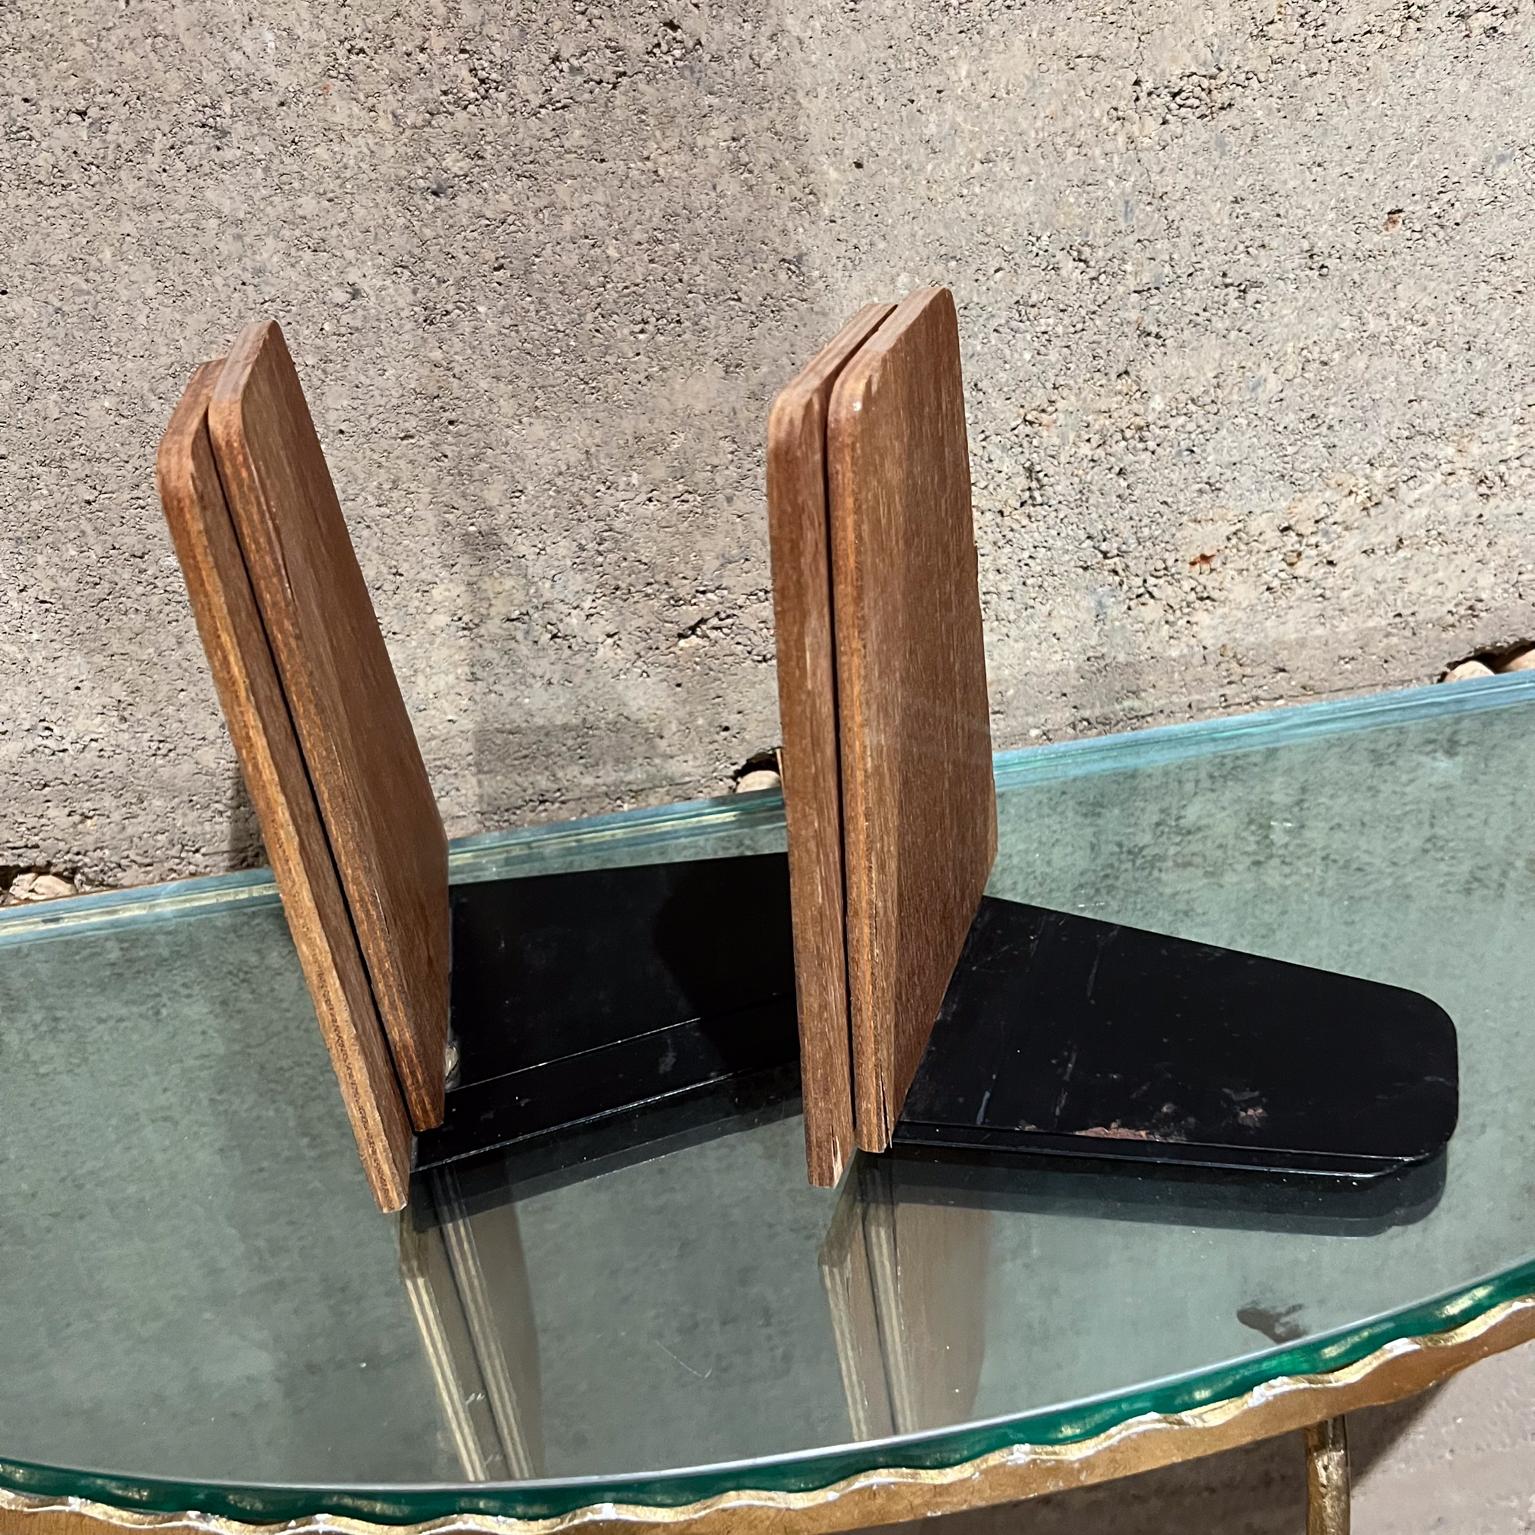 1960s Vintage Midcentury Double Panel Teak Bookends
7 h x 5.25 d x 5 w
Unrestored preowned original vintage condition
Wear and tear are present
Refer to all images for condition